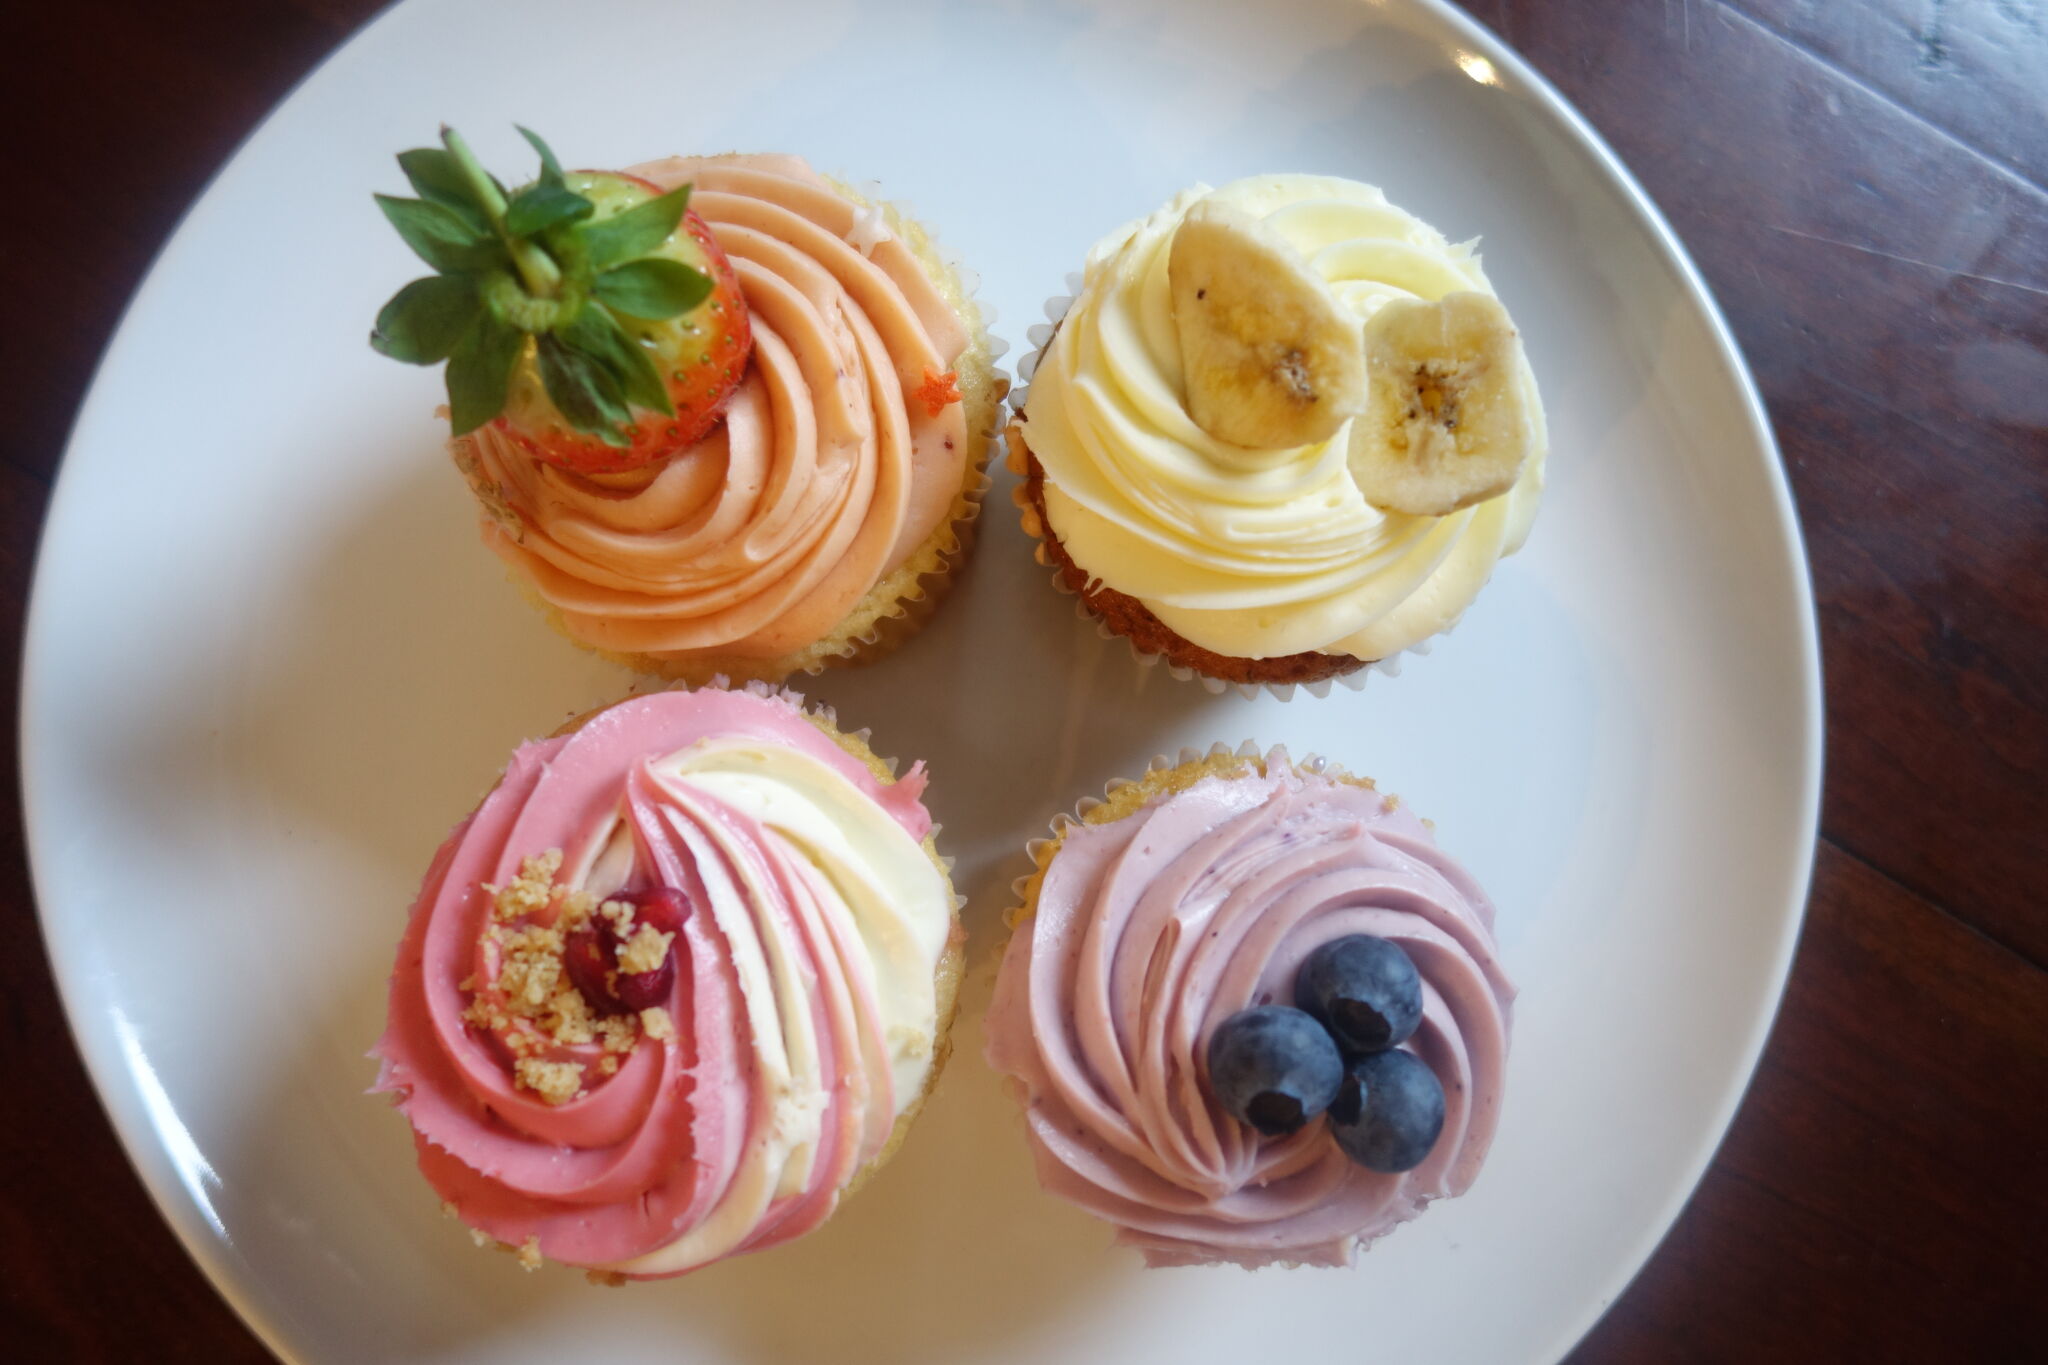 These vegan bakeries in SF have mastered plant-based sweets